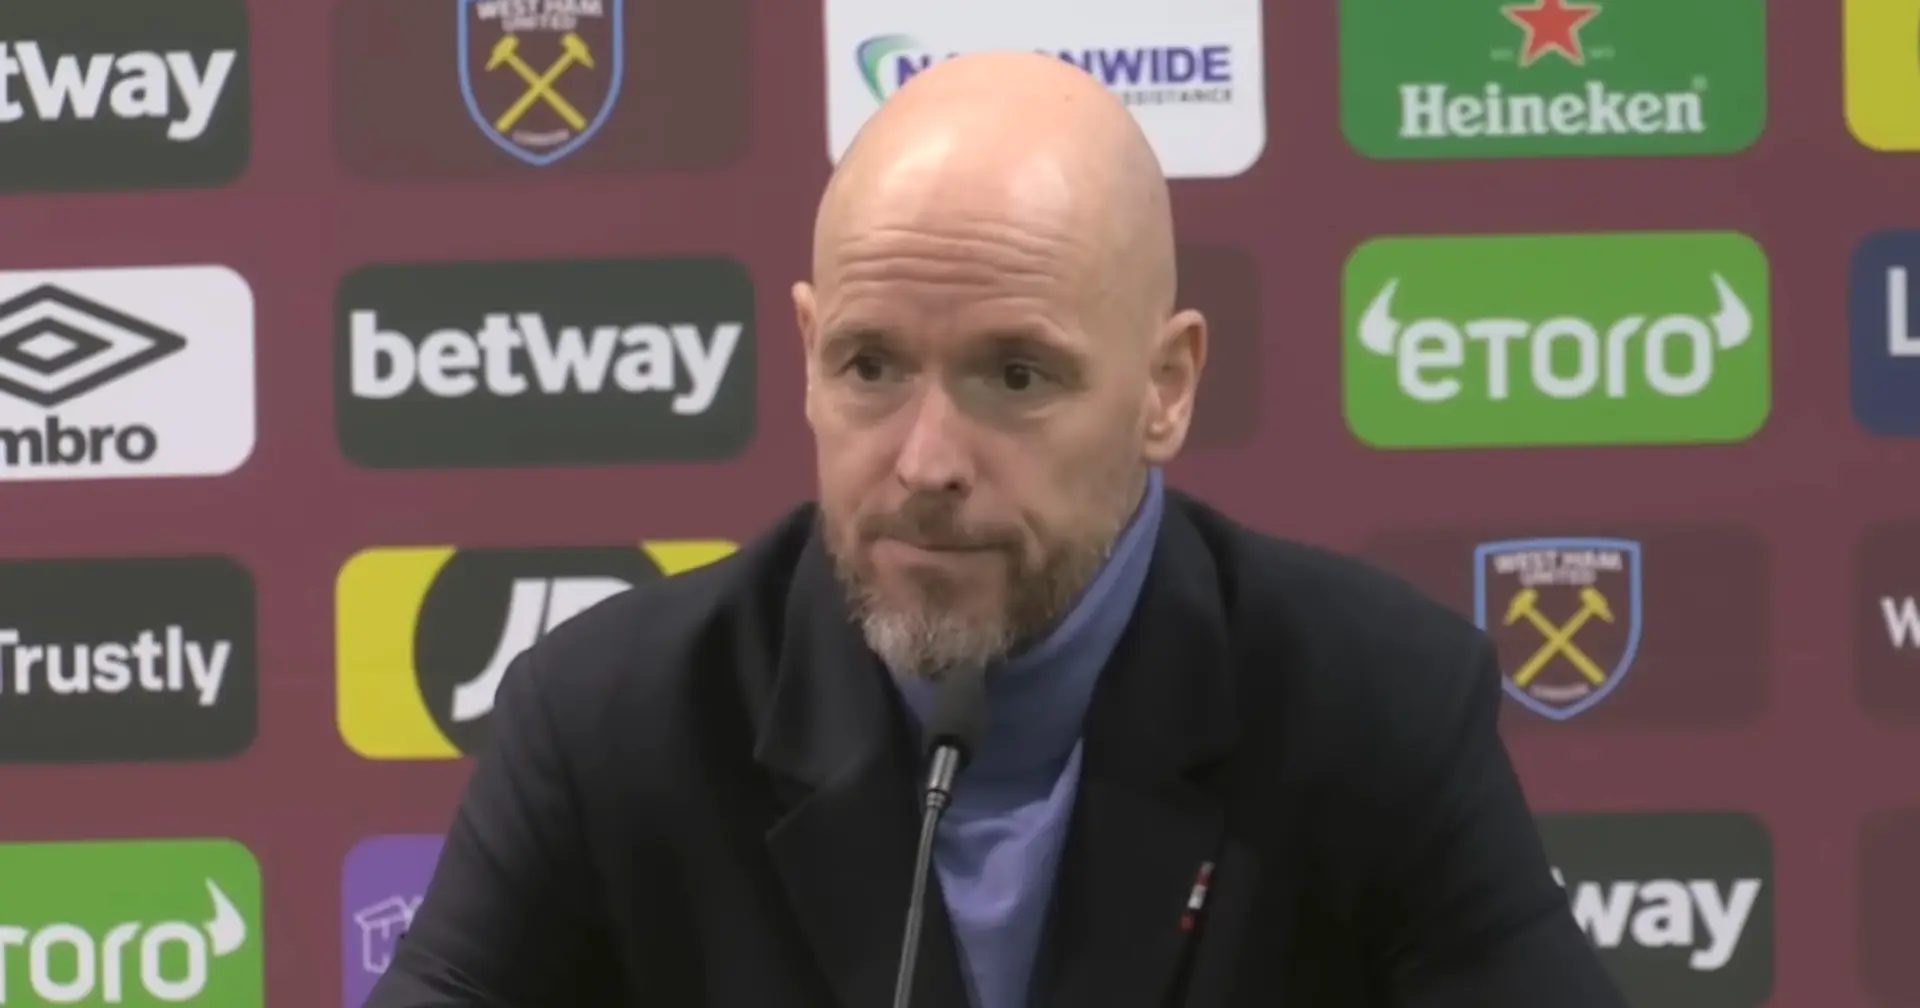 'We have players who can do it': Erik ten Hag confident Man United will survive ongoing crisis